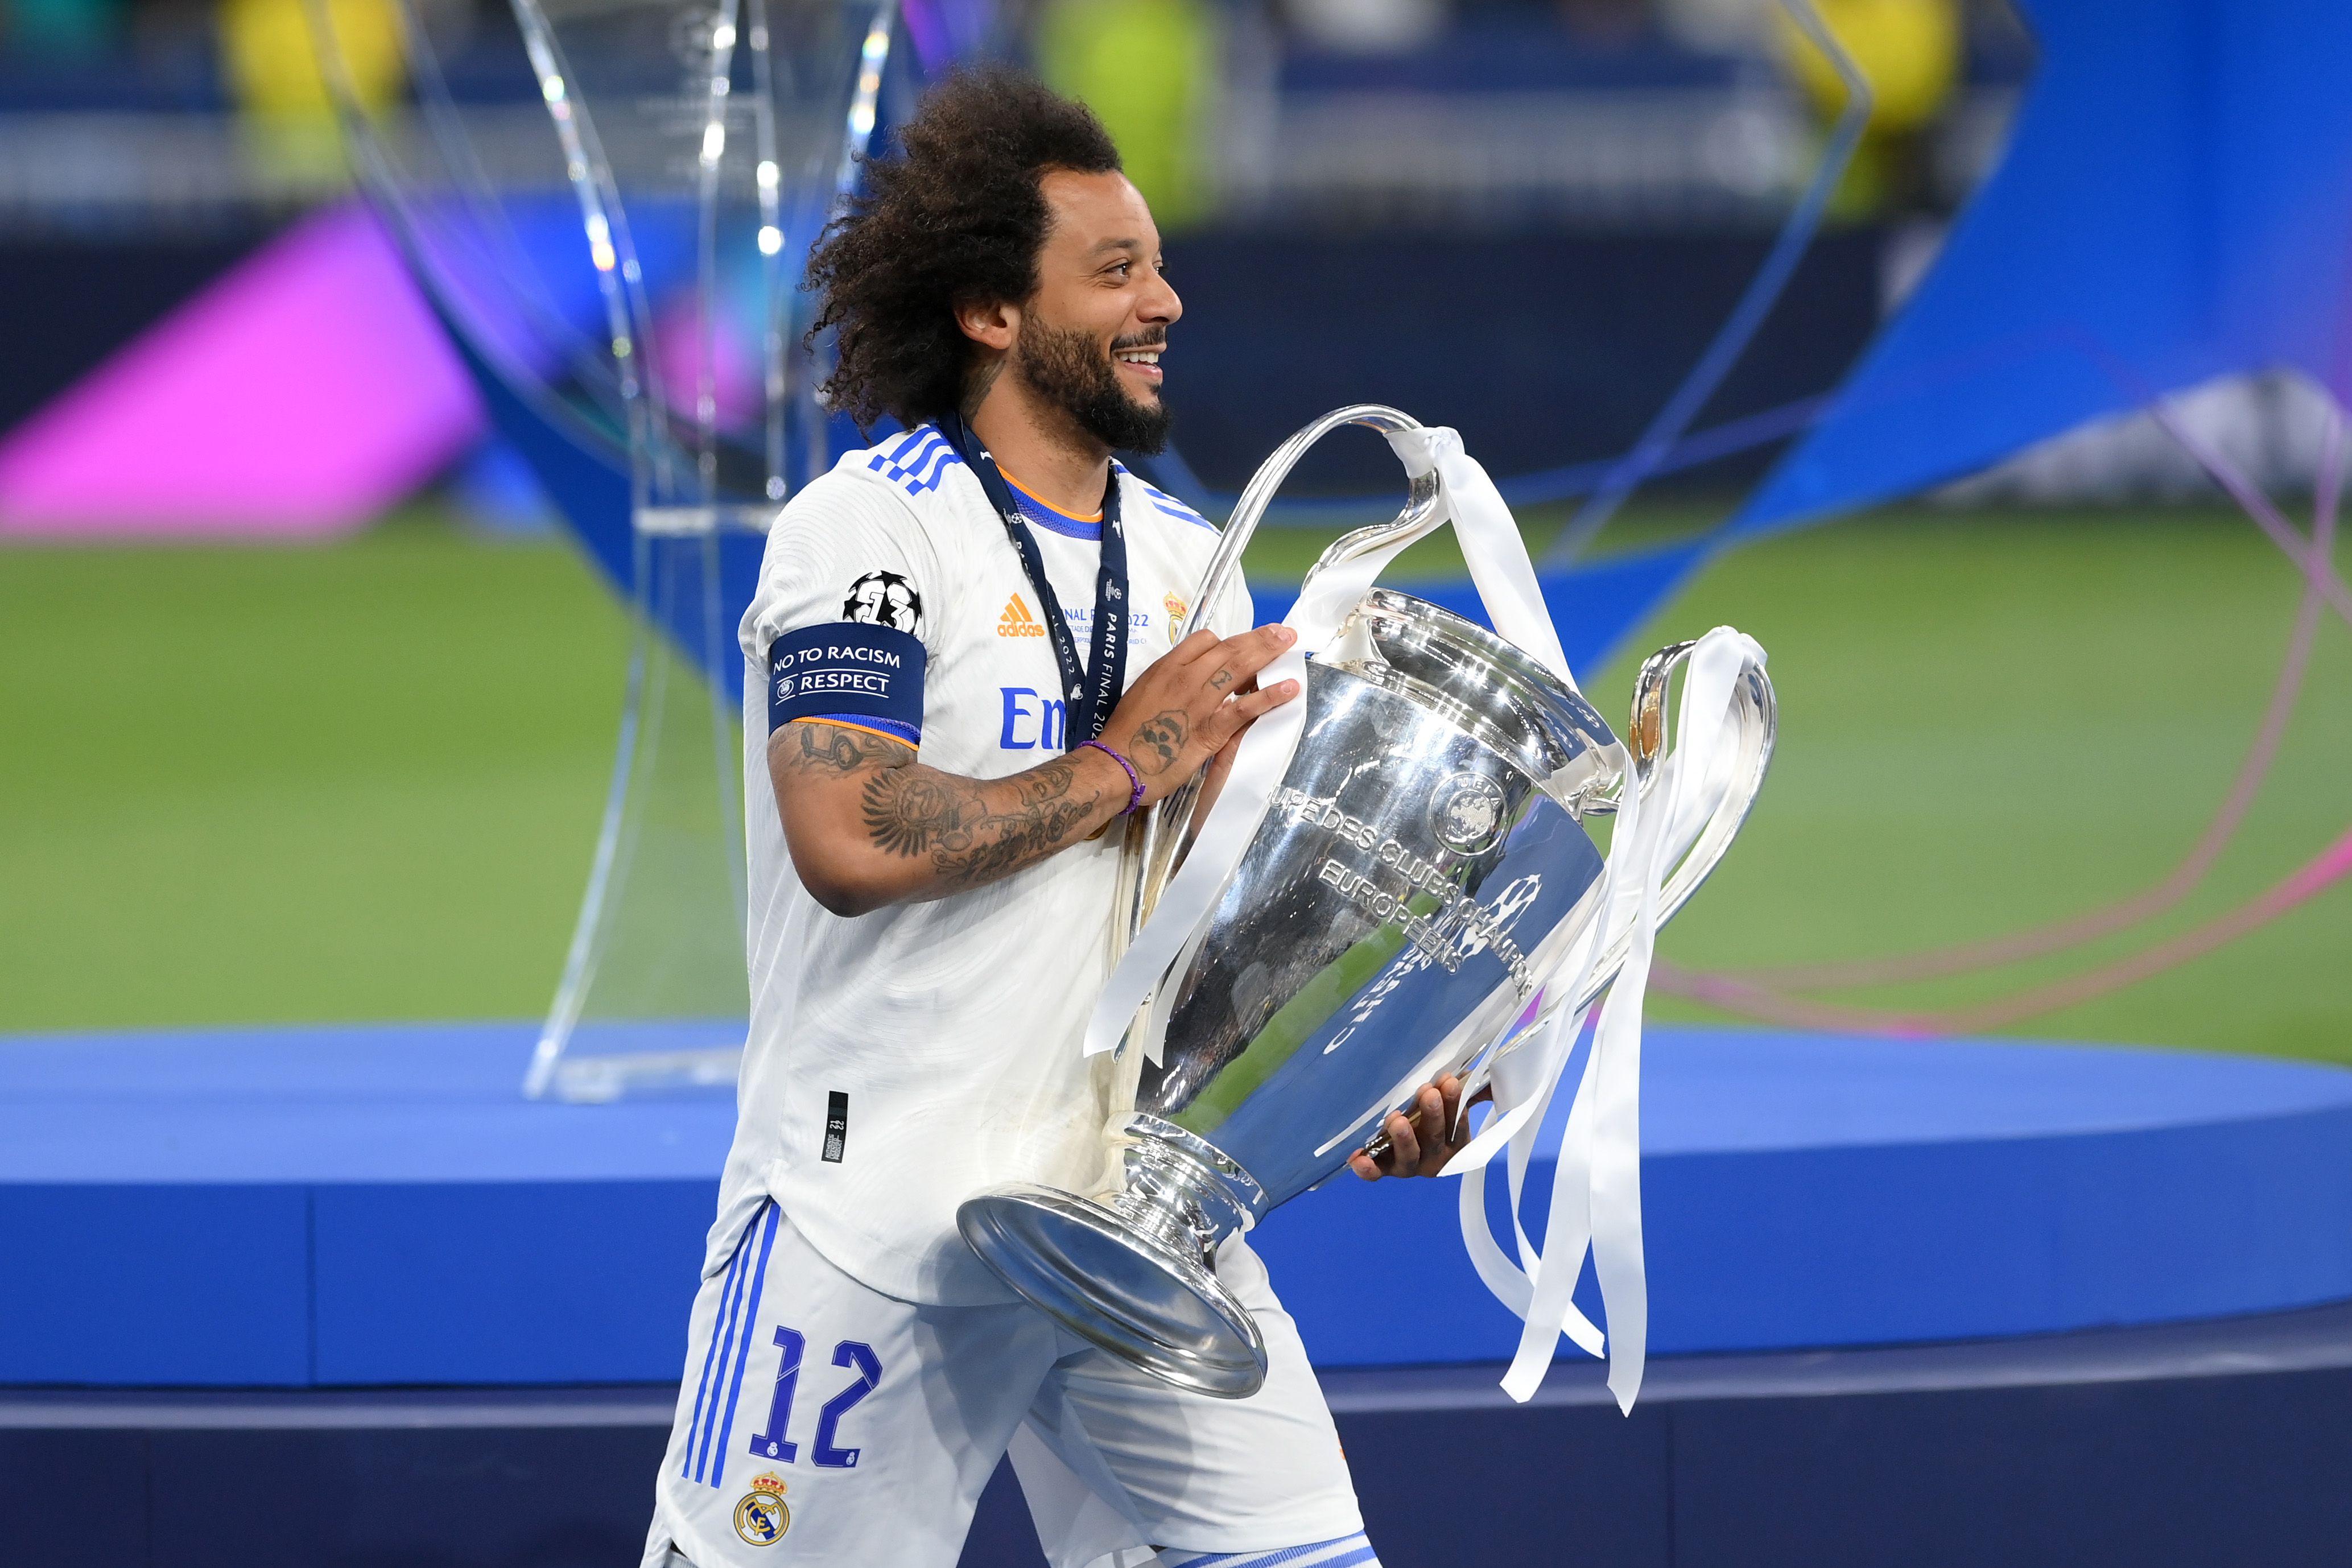 Marcelo lifts the Champions League